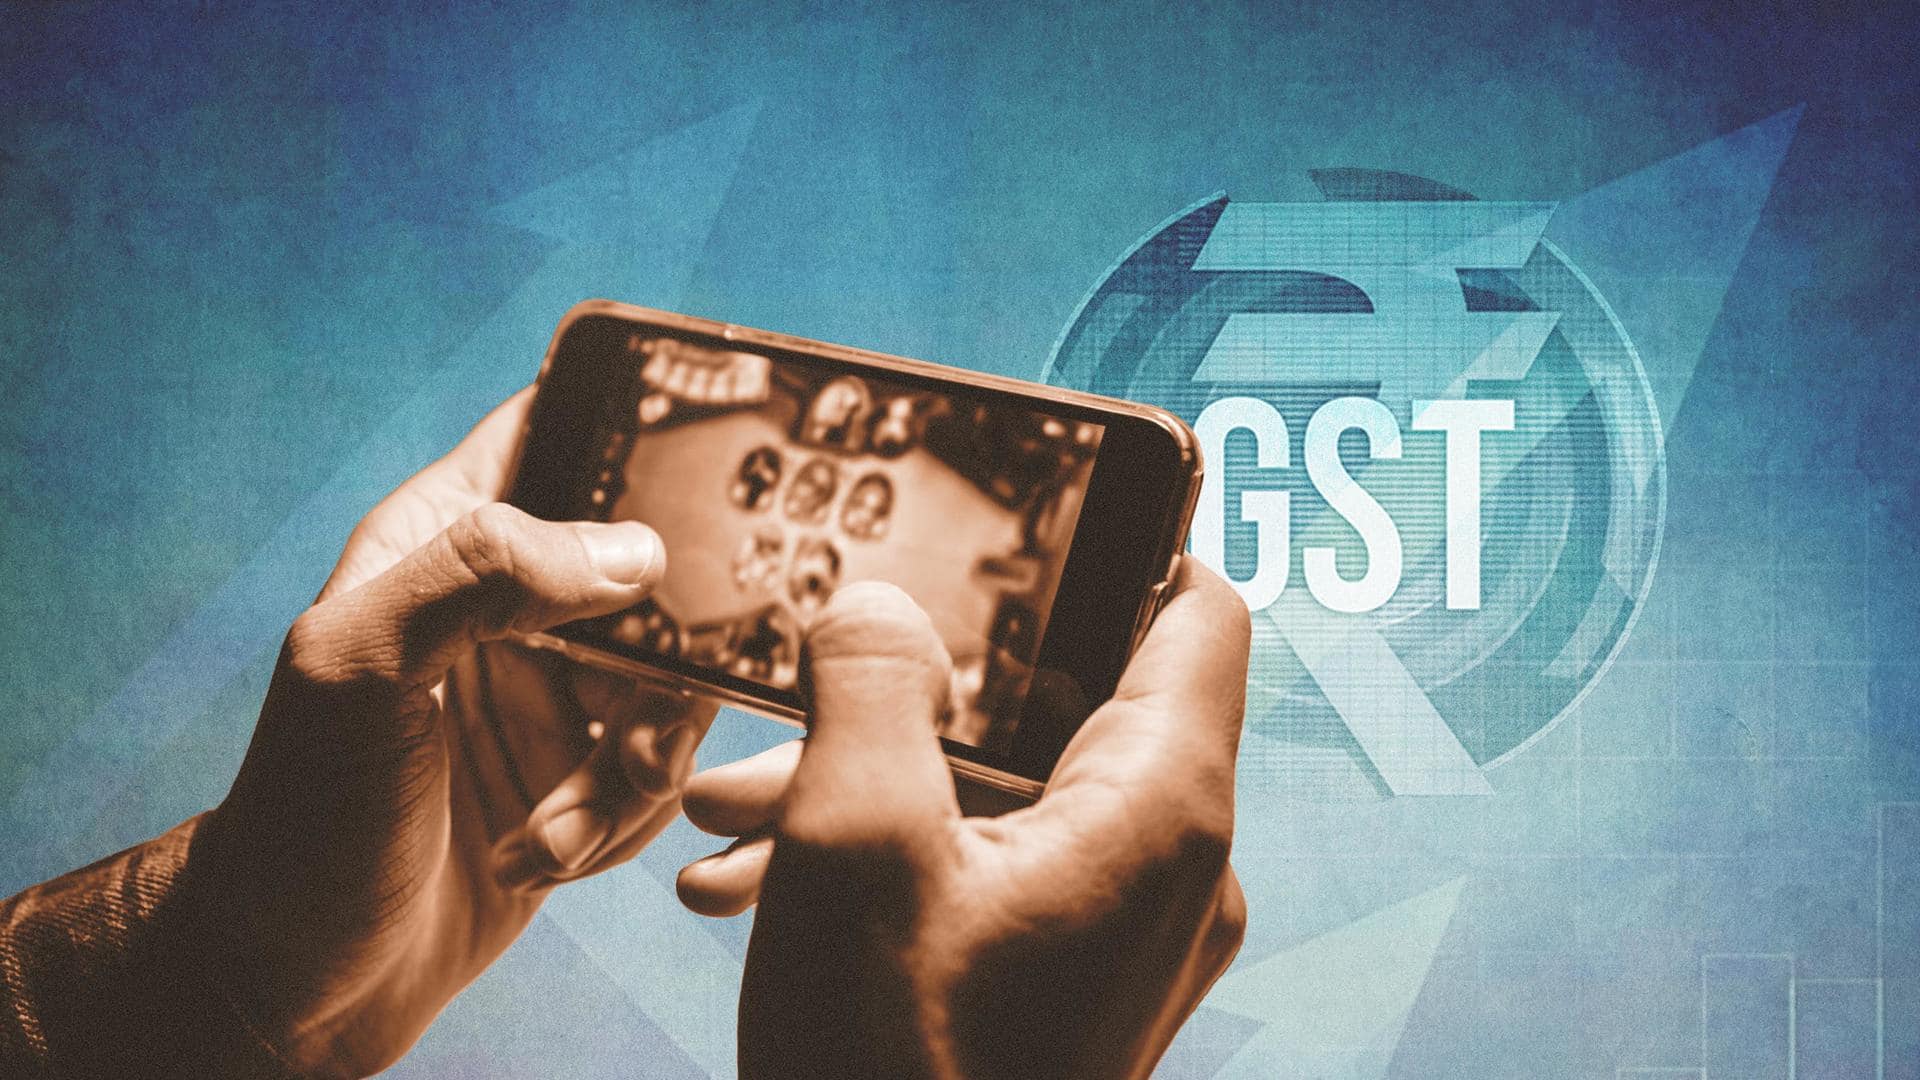 The 28% GST will kill India's gaming industry: Here's how